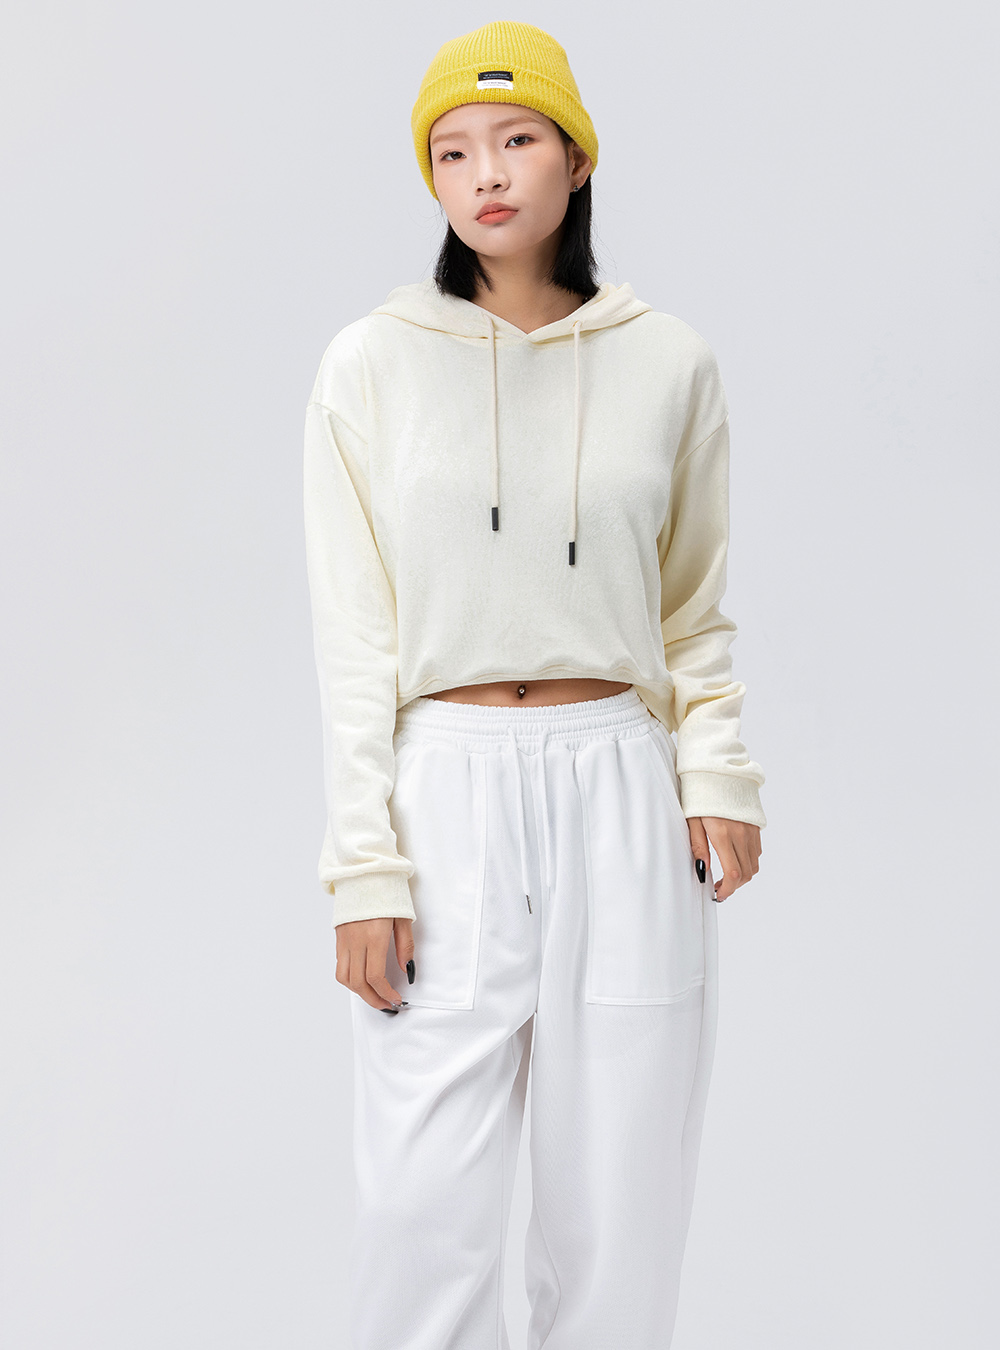 300GSM 85% Cotton 15% Polyester Oversize Hoodie Crop Top For Women